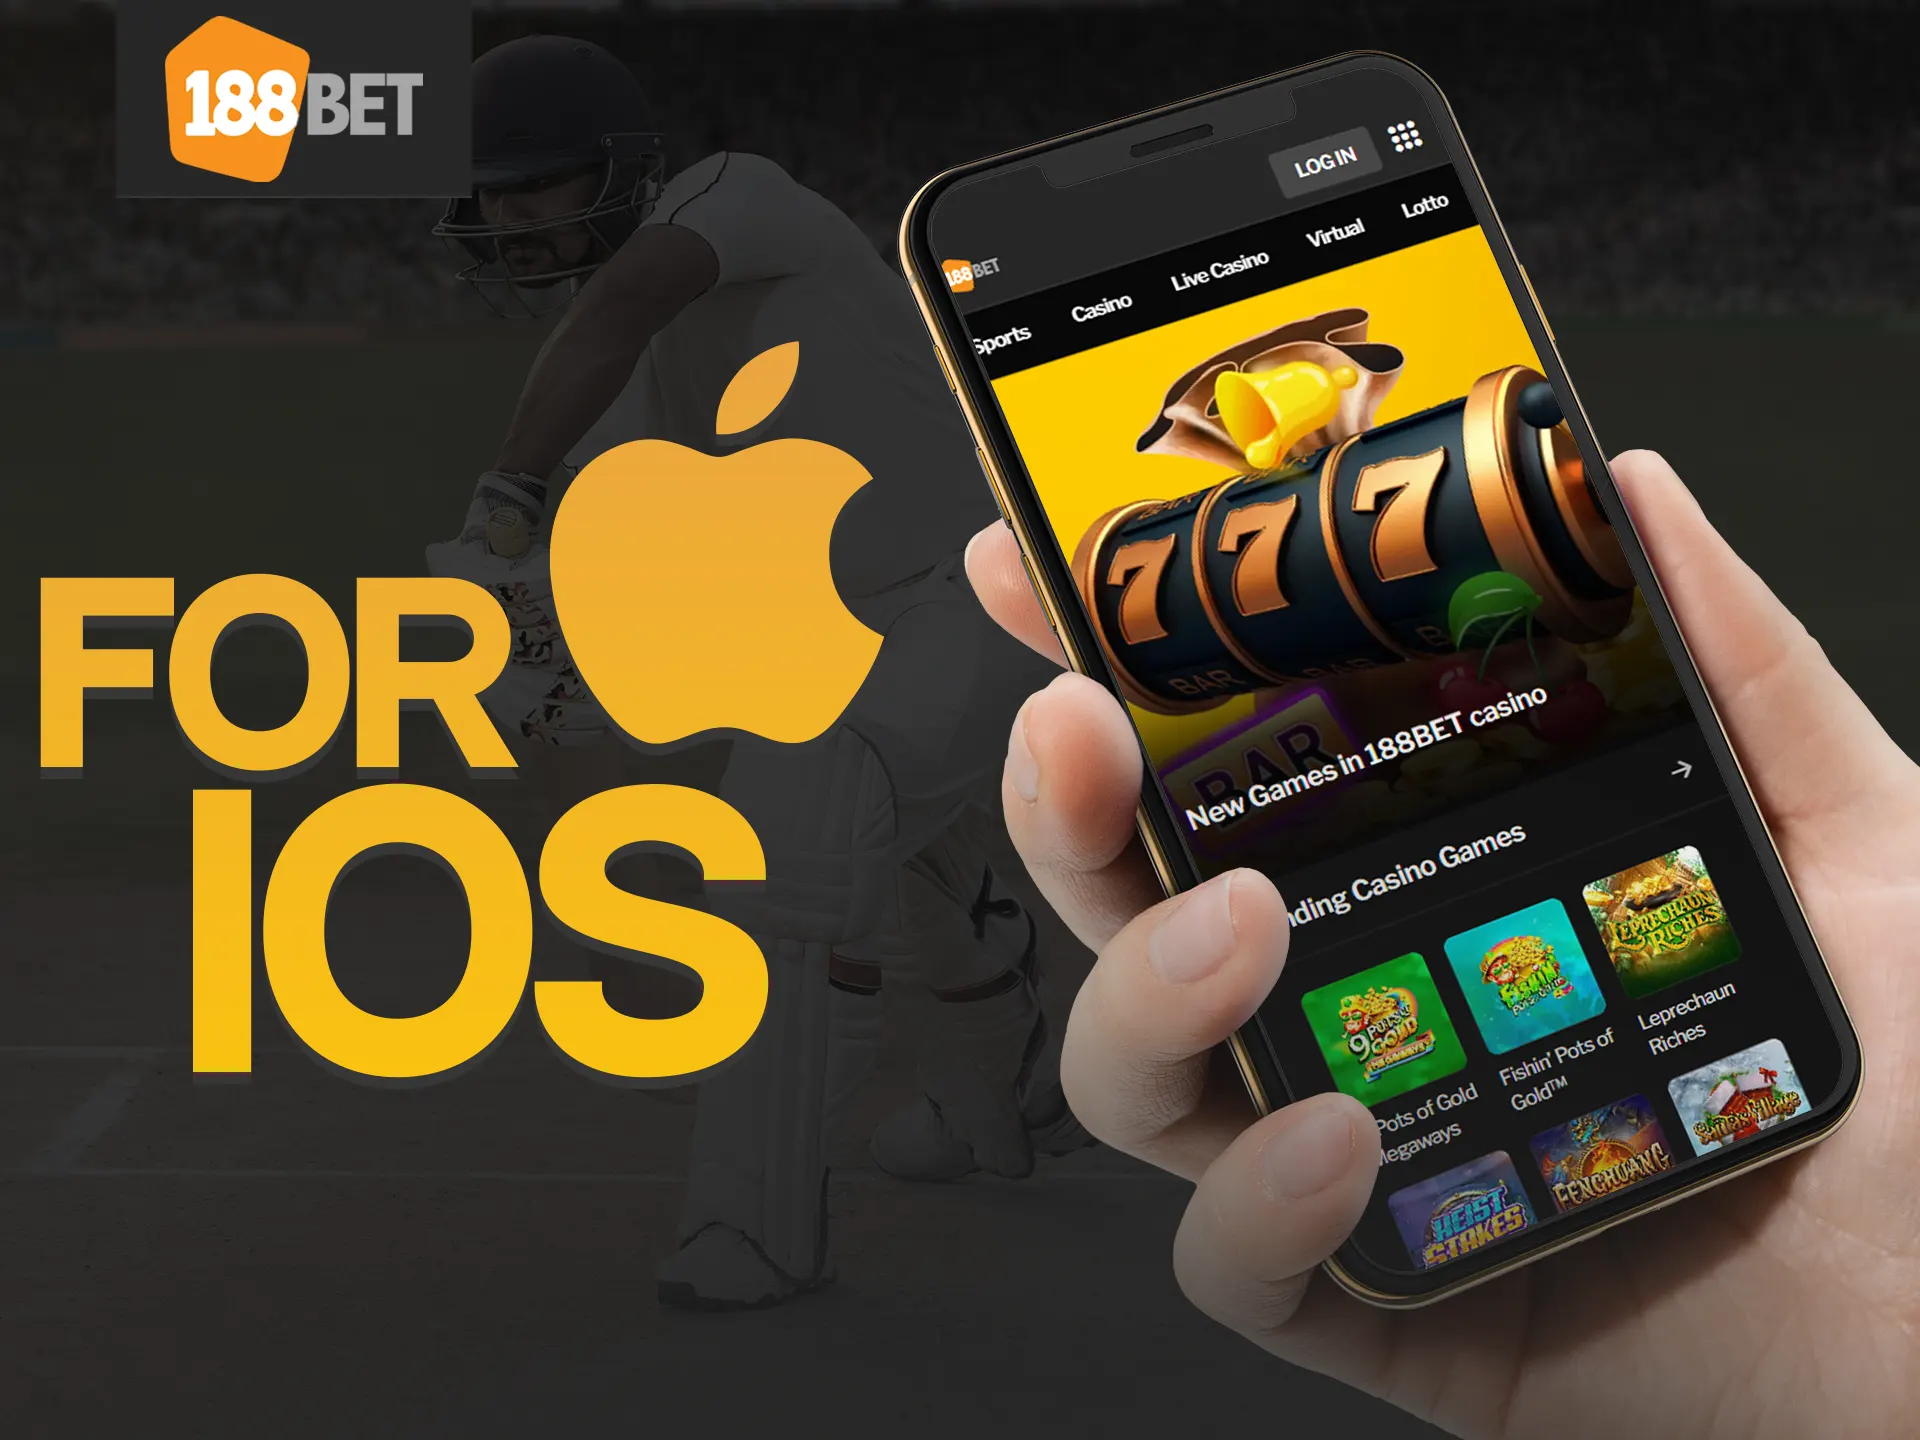 With the 188bet iOS app, bet on sports and play in casinos.